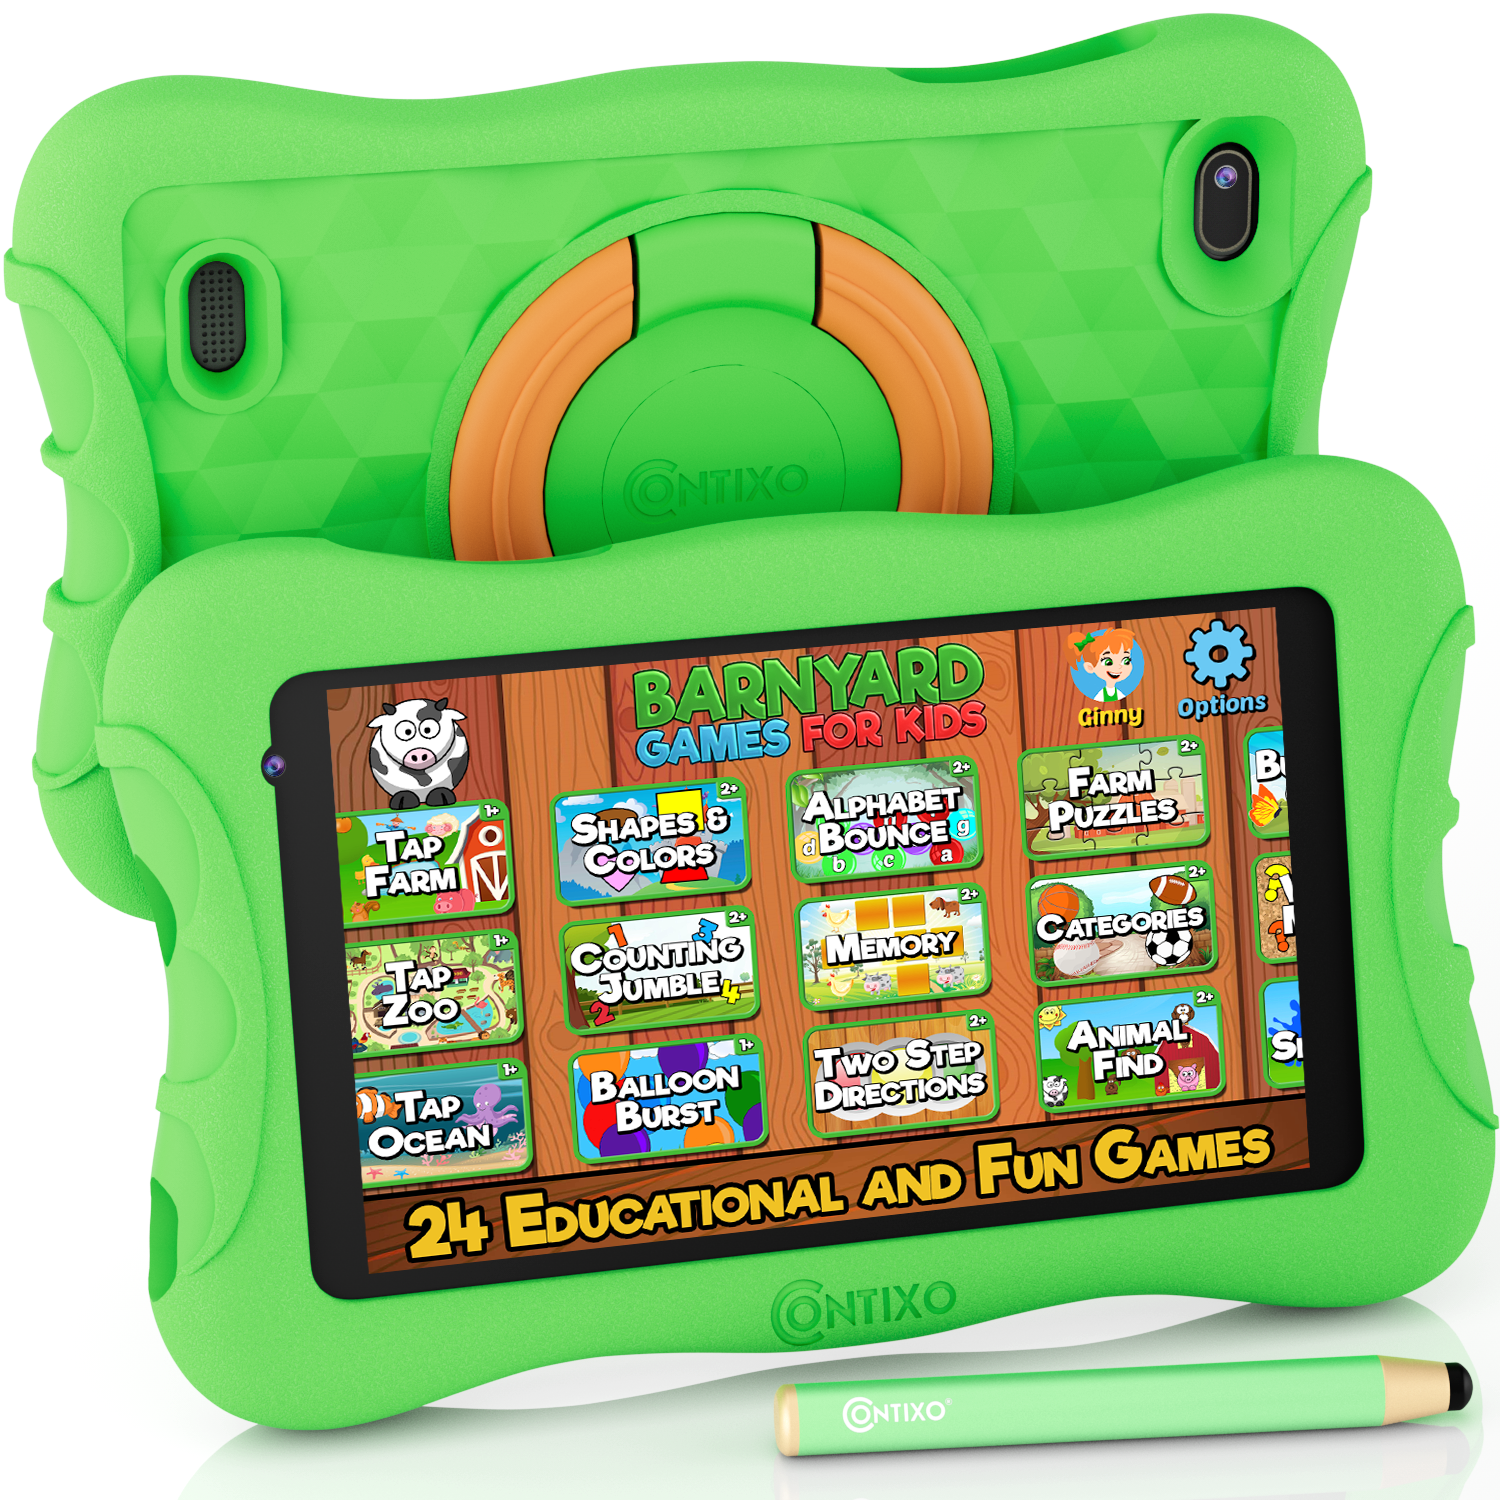 Contixo V10Plus Bundle, 7 inch Kids Learning Tablet with Headphone, Pre-loaded Teacher Approved Apps and Parent control - Green Set - image 4 of 6